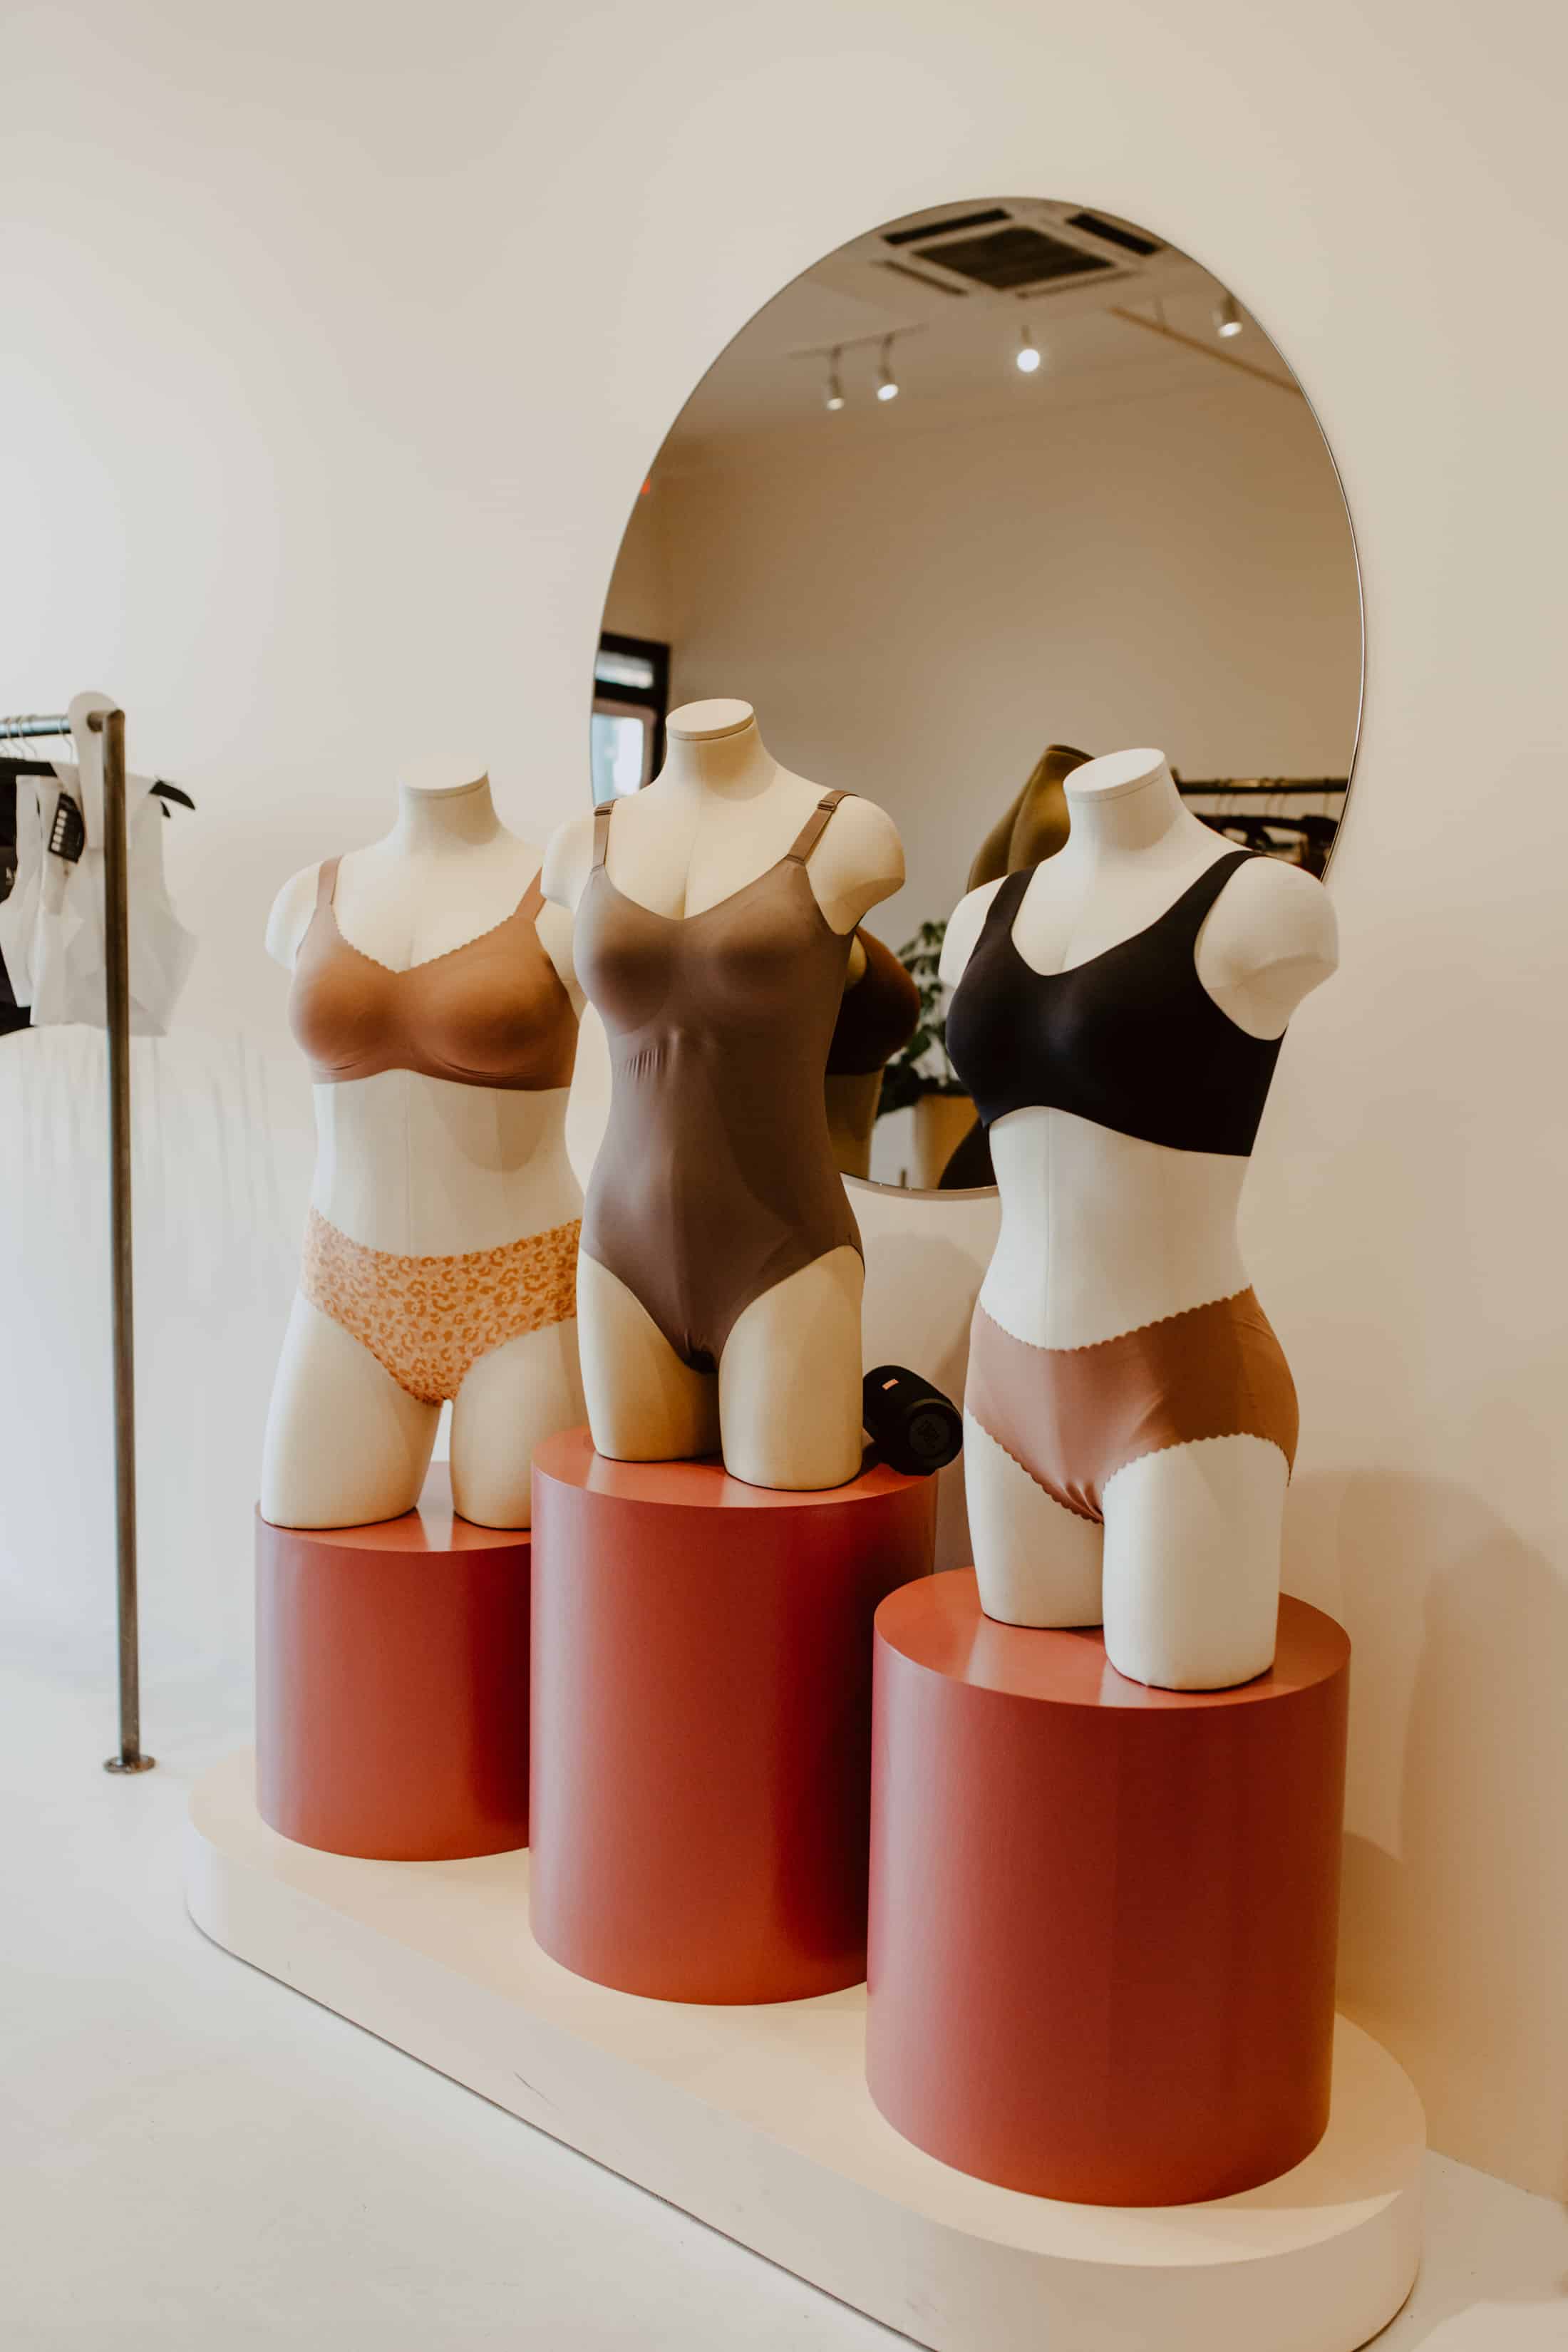 Meet the Women Behind Knix Bras, the Inclusive Intimates Brand